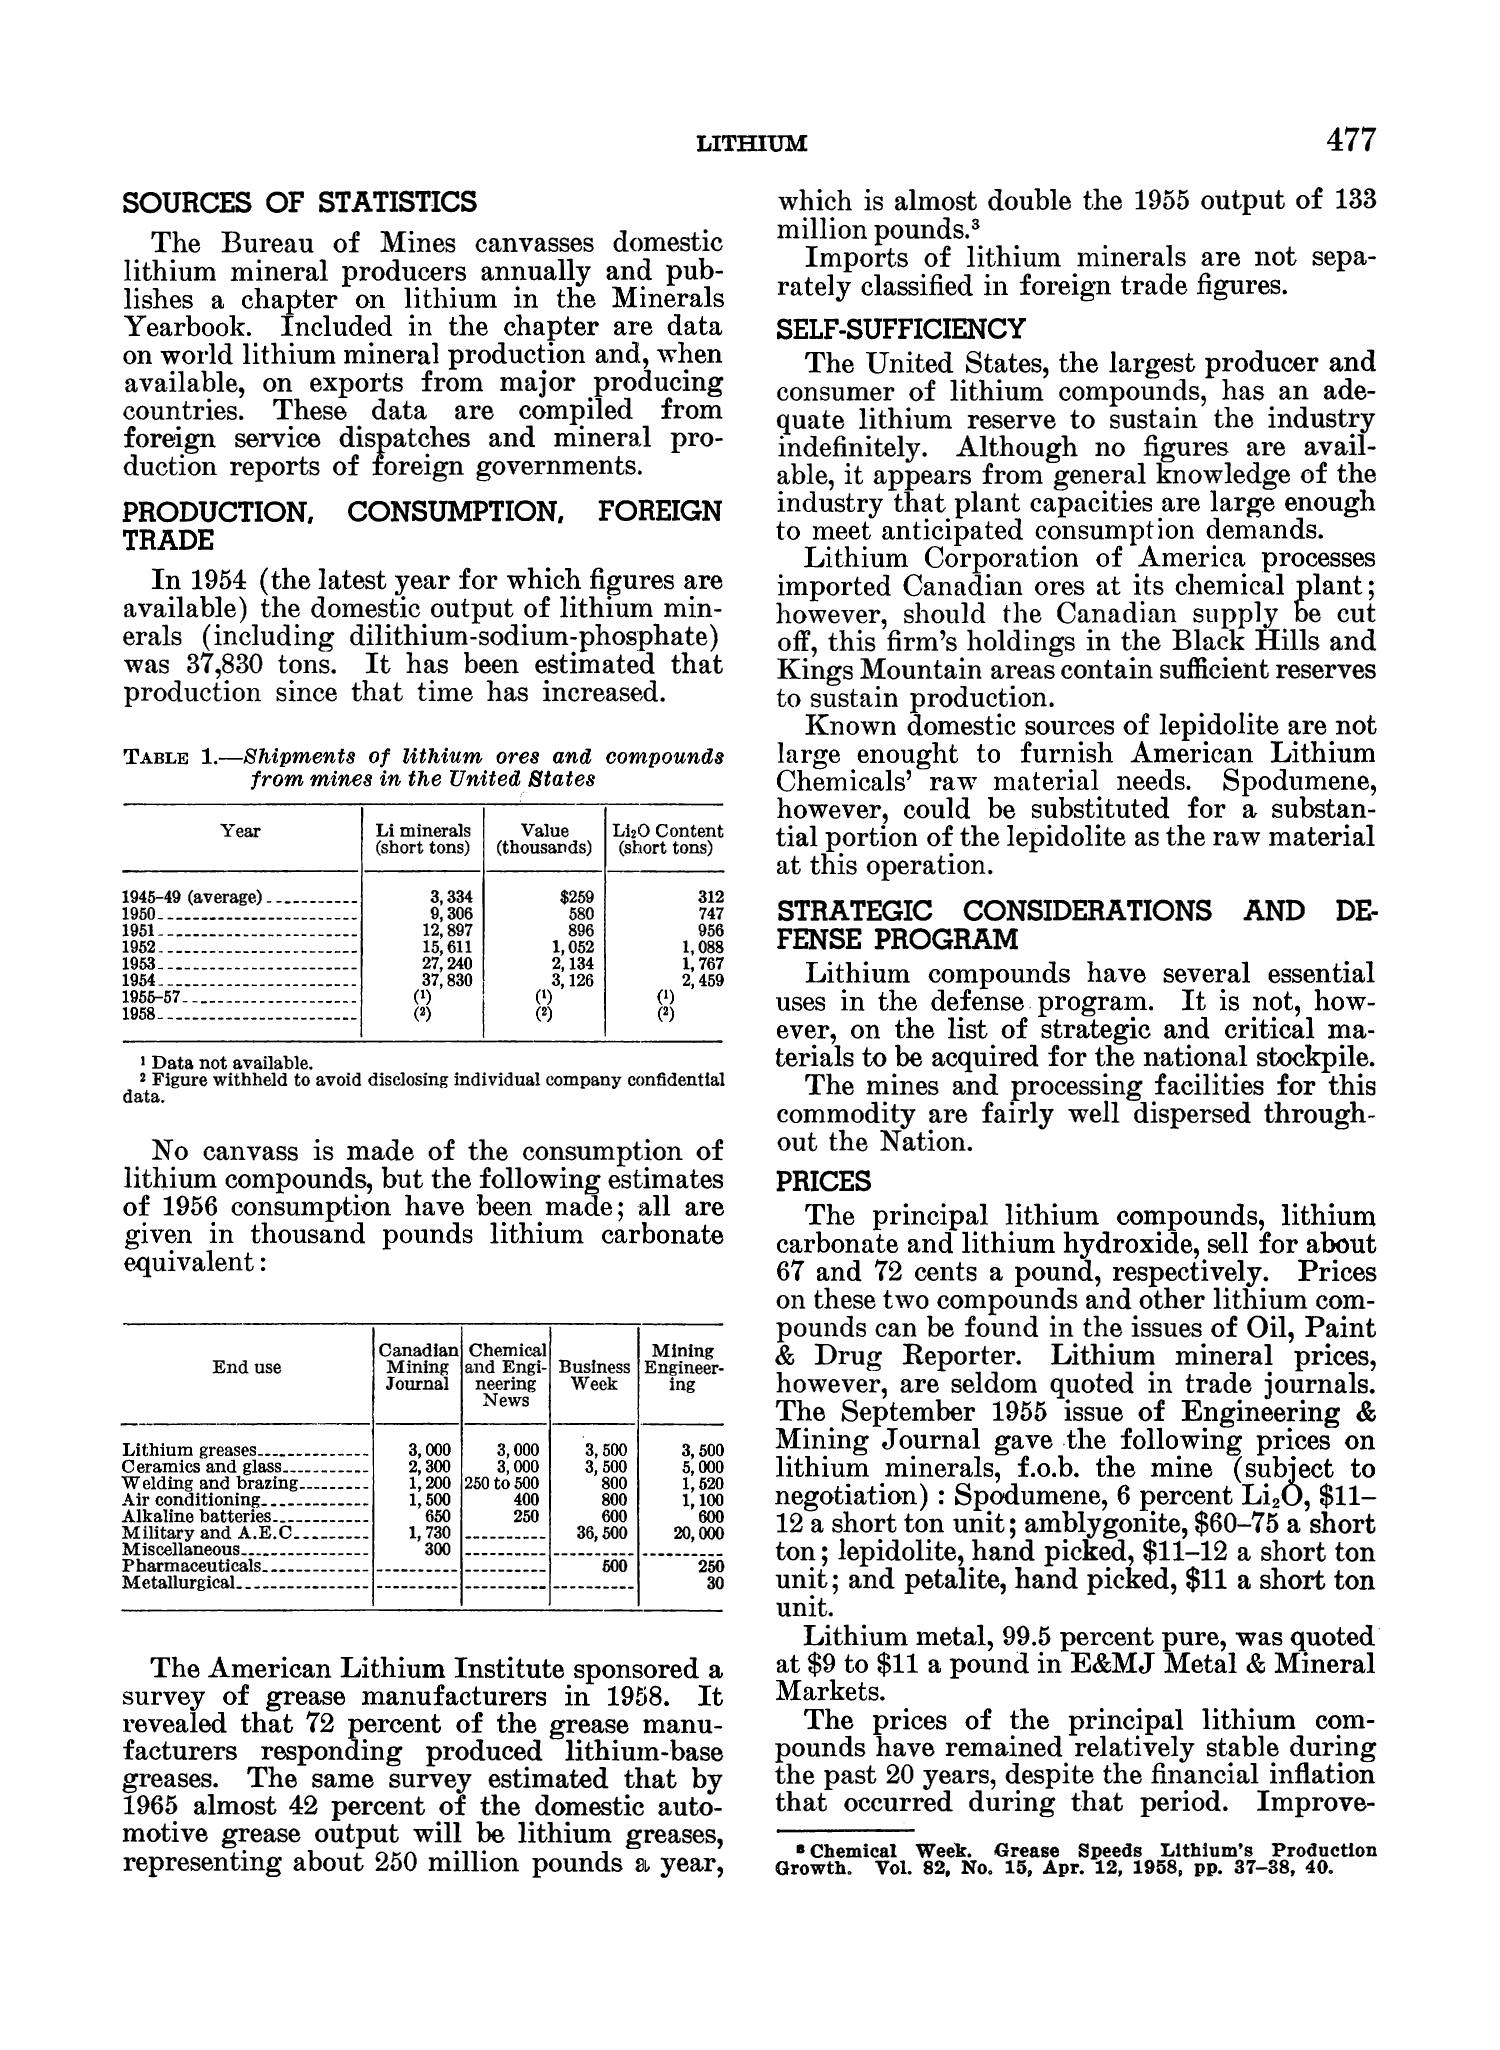 Mineral Facts and Problems: 1960 Edition
                                                
                                                    477
                                                